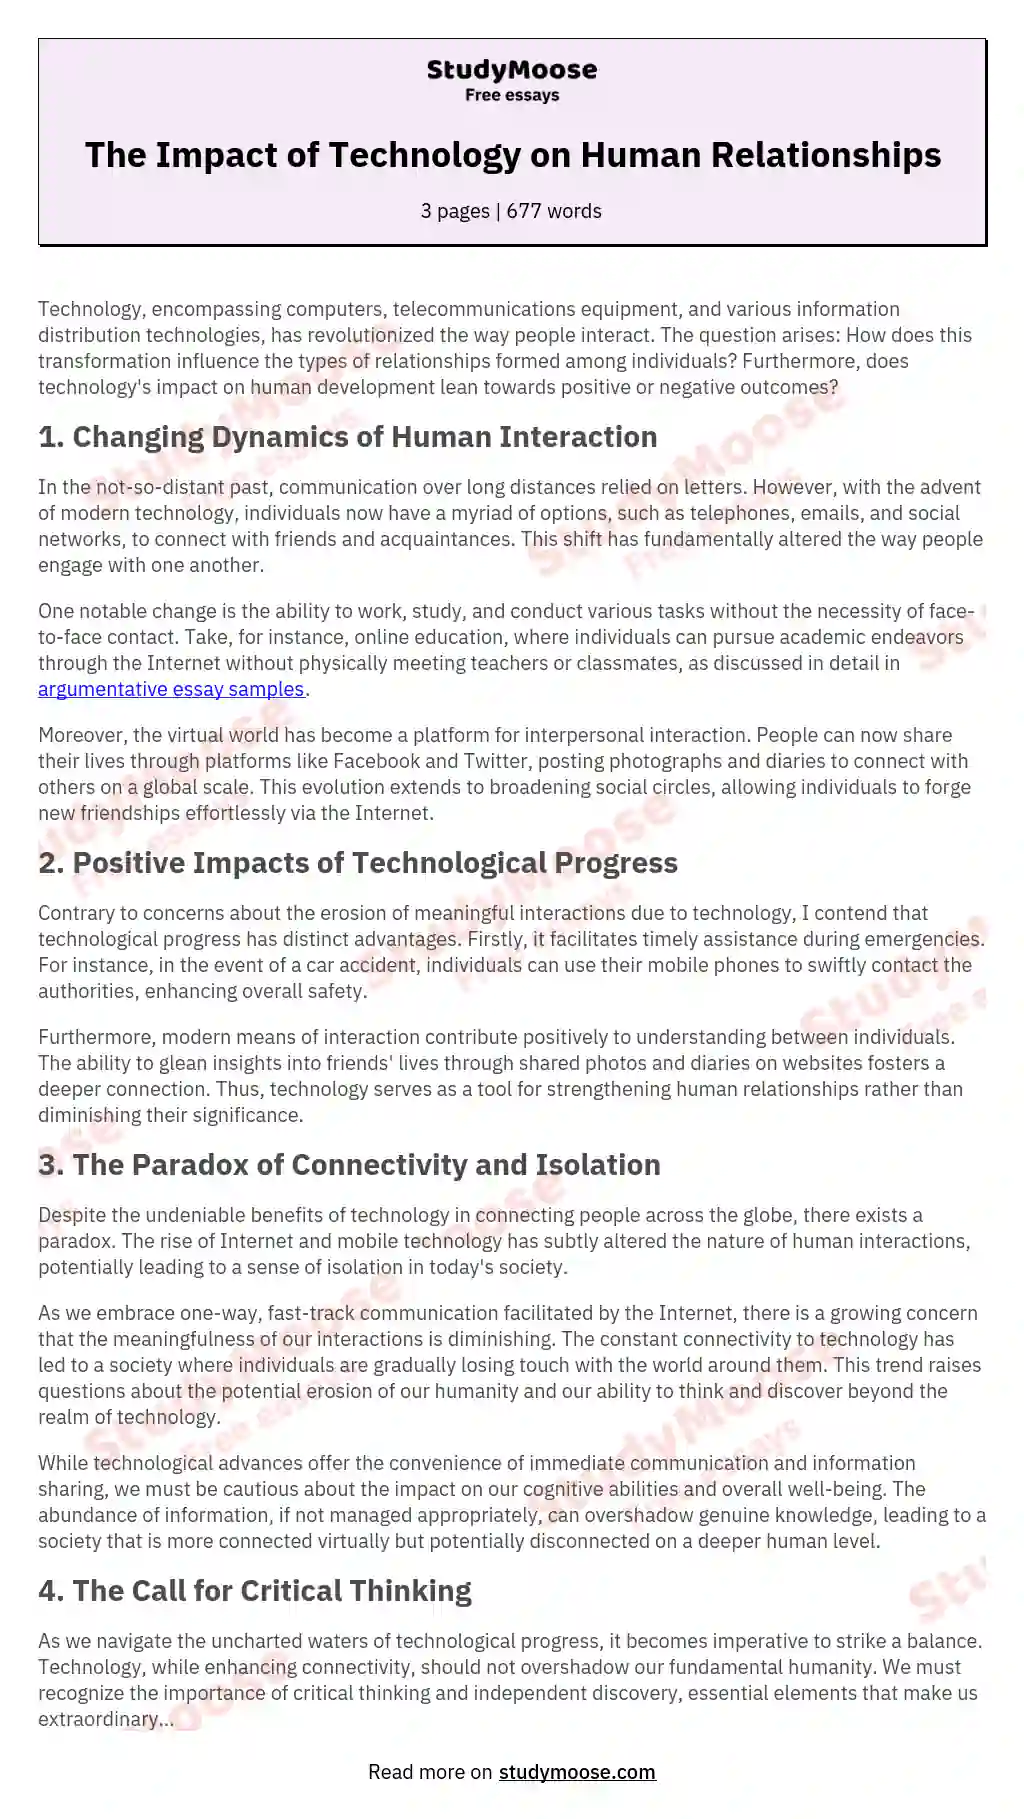 The Impact of Technology on Human Relationships essay